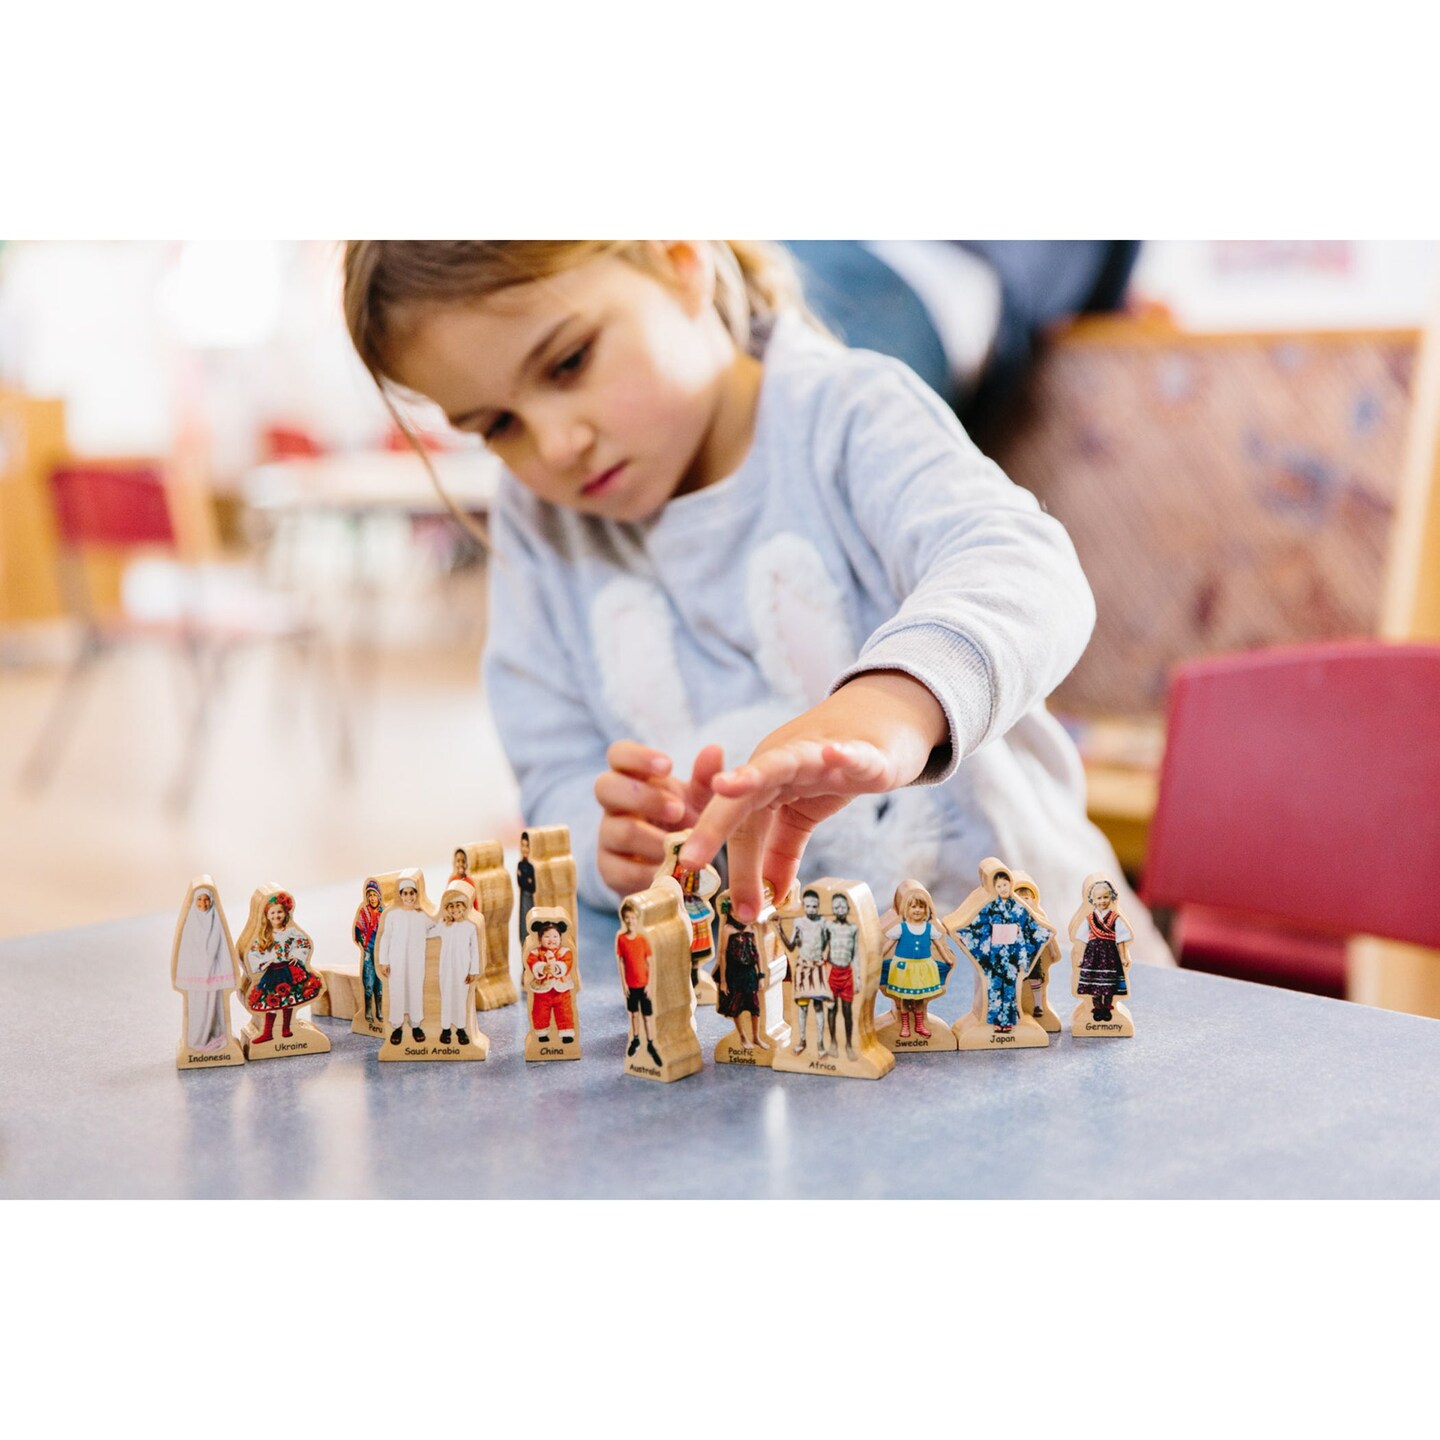 People Around the World Wooden Blocks - Set of 18 - Ages 1+